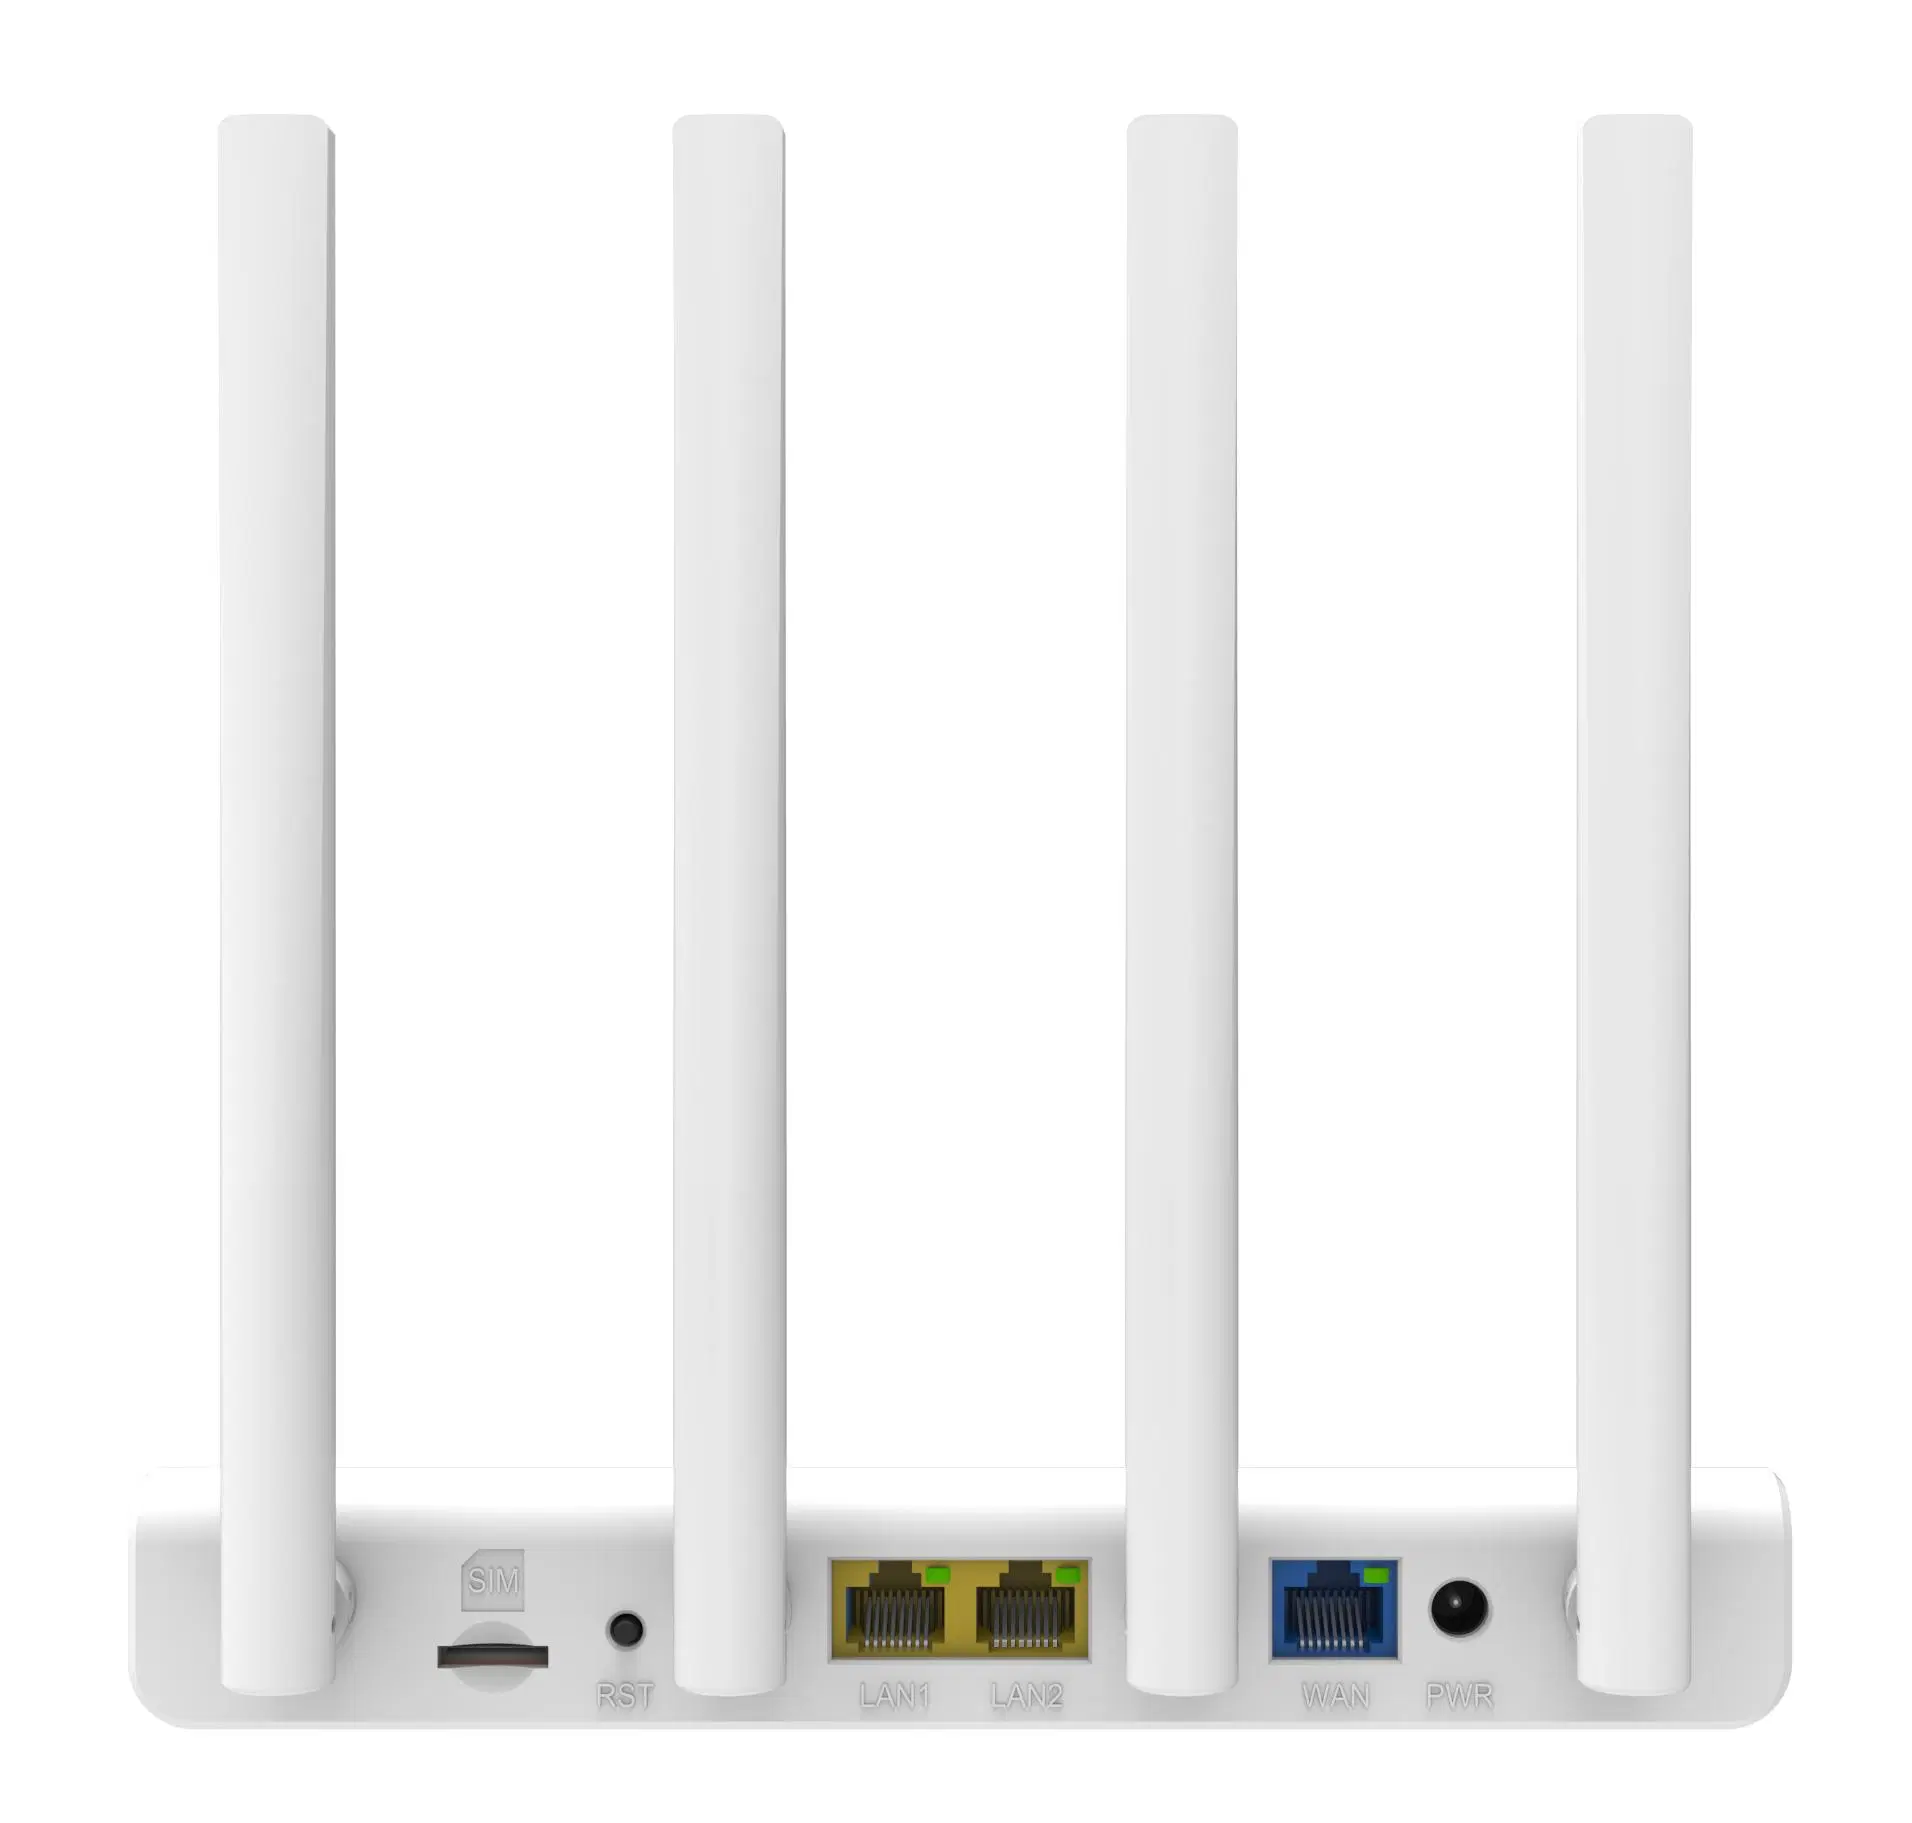 Wi-Fi6 5g CPE with External Antenna, 5g Router with SIM Card Slot, Plug and Play